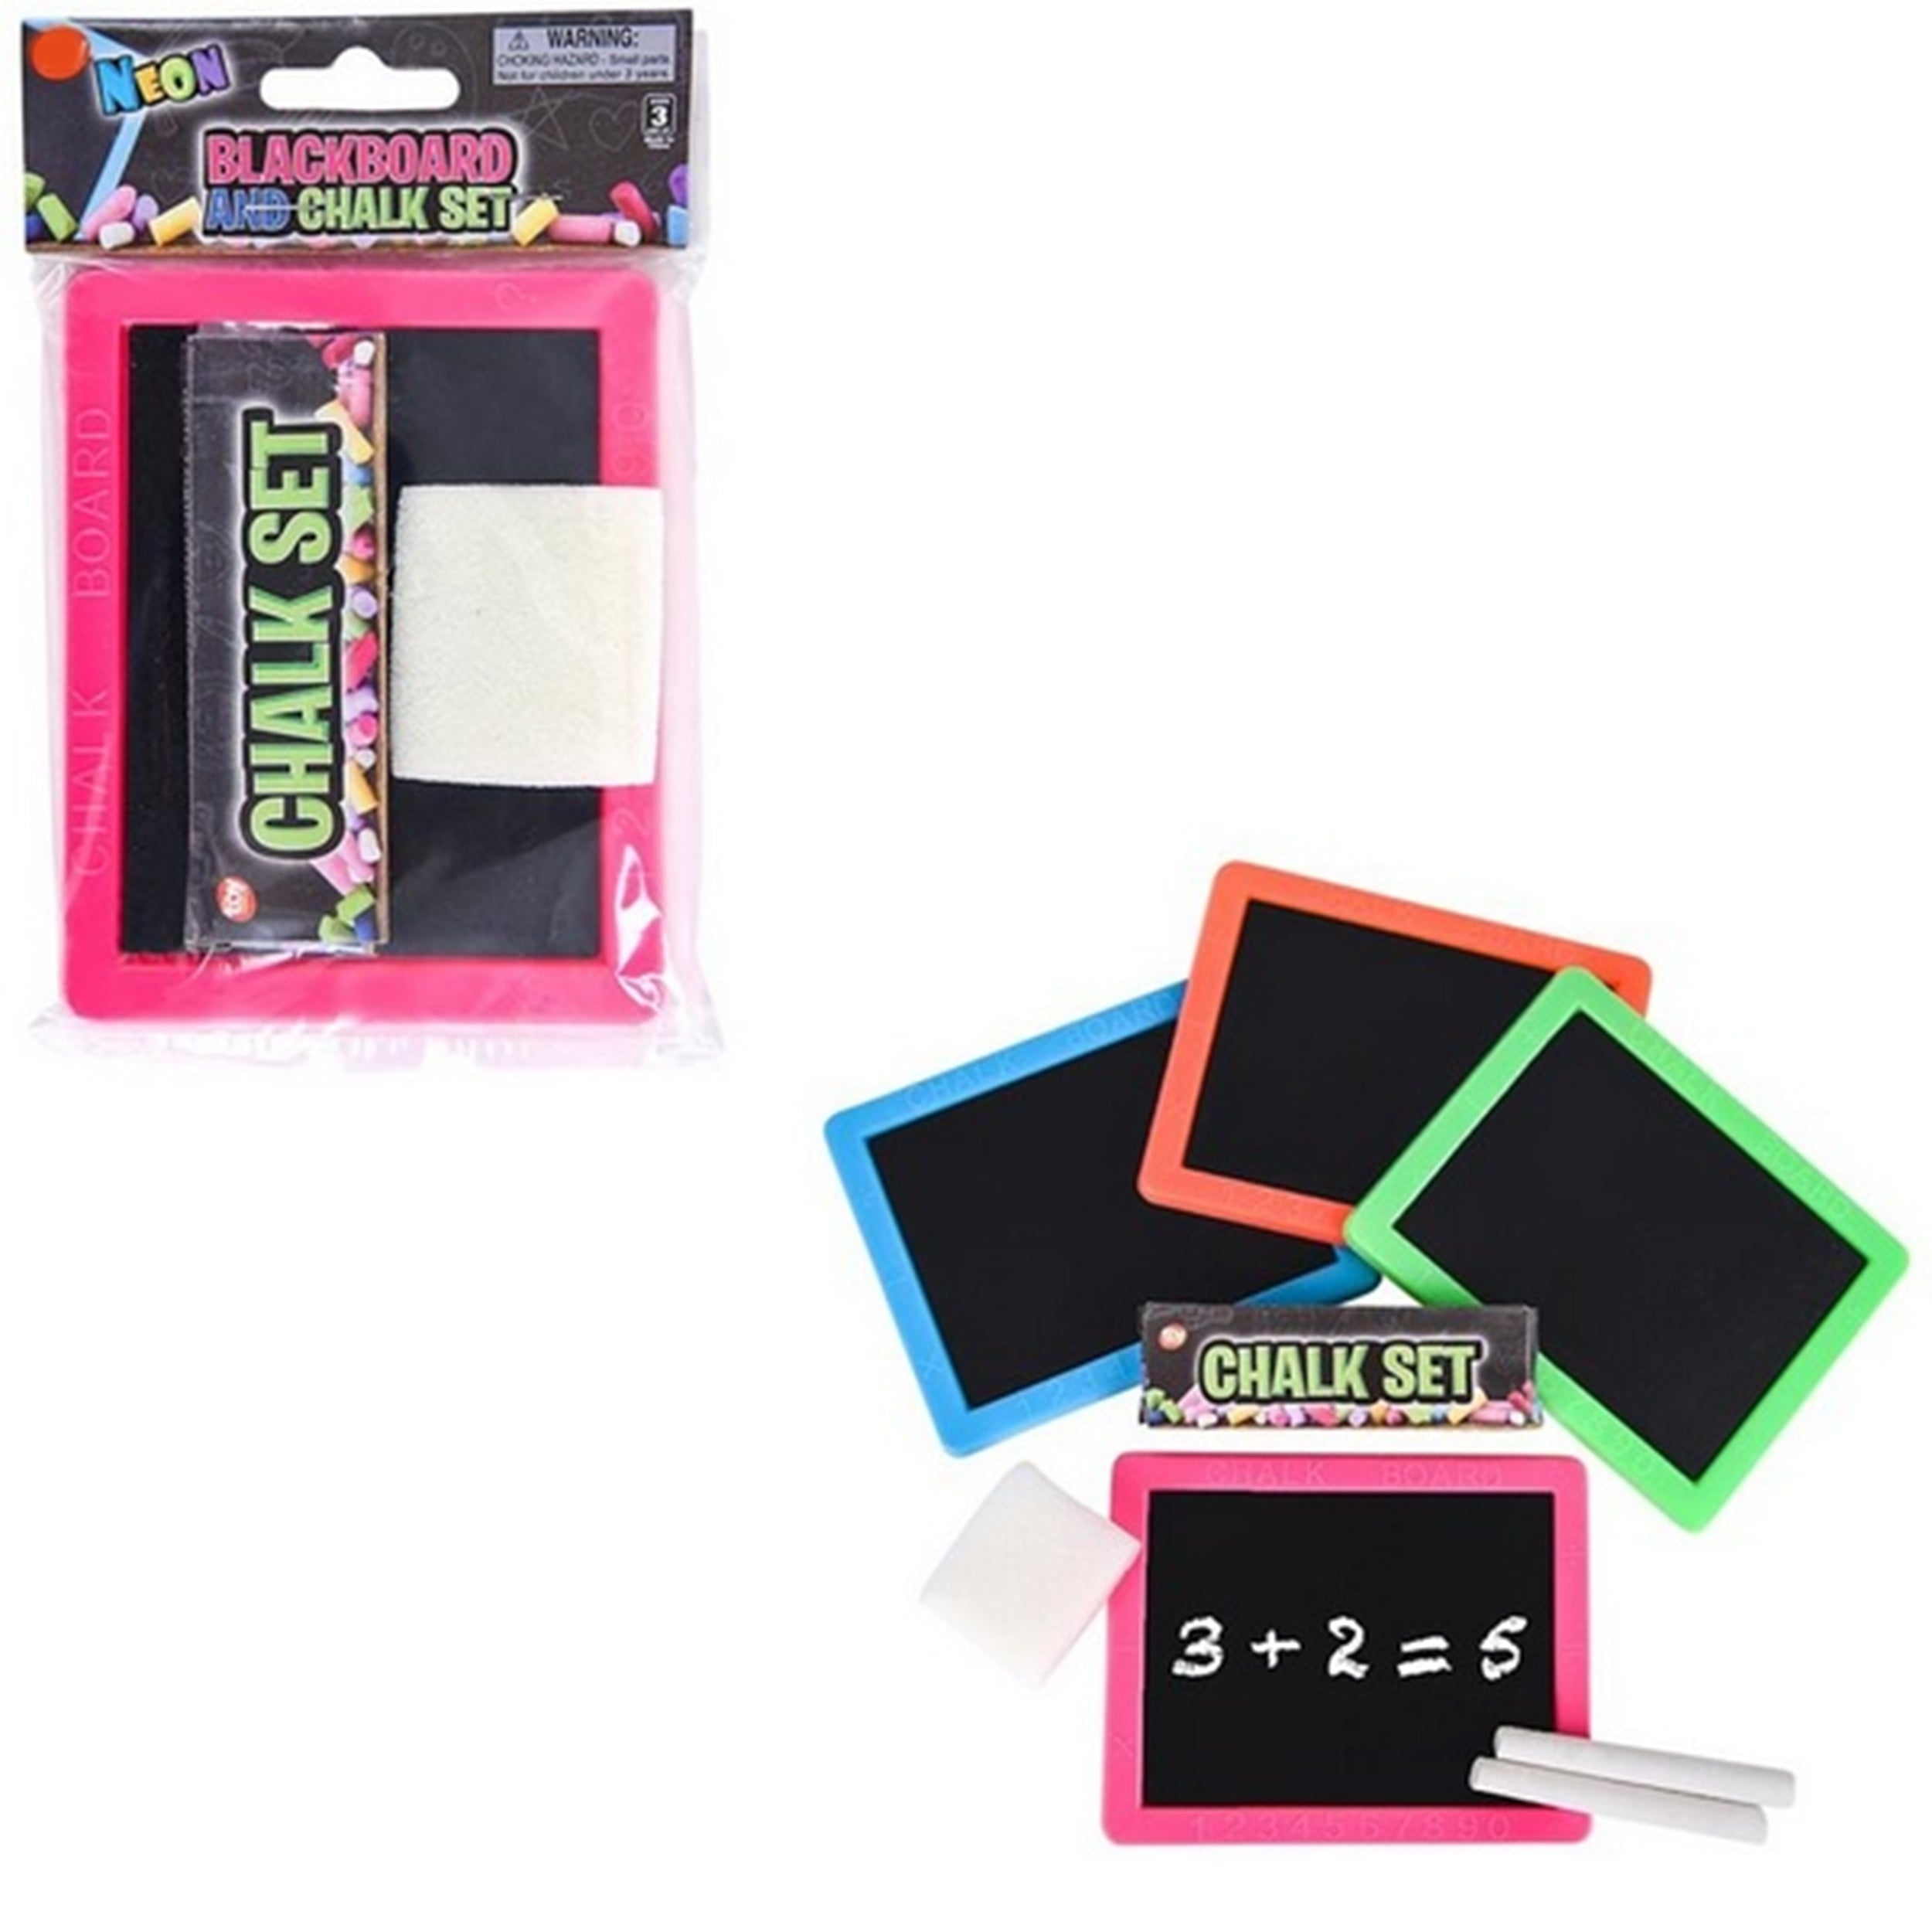 Neon Chalkboard Set Includes Board, Chalk, and Eraser, Educational Learning, Kids Prizes, Prize Giveaways, Party Favors - Assorted Colors